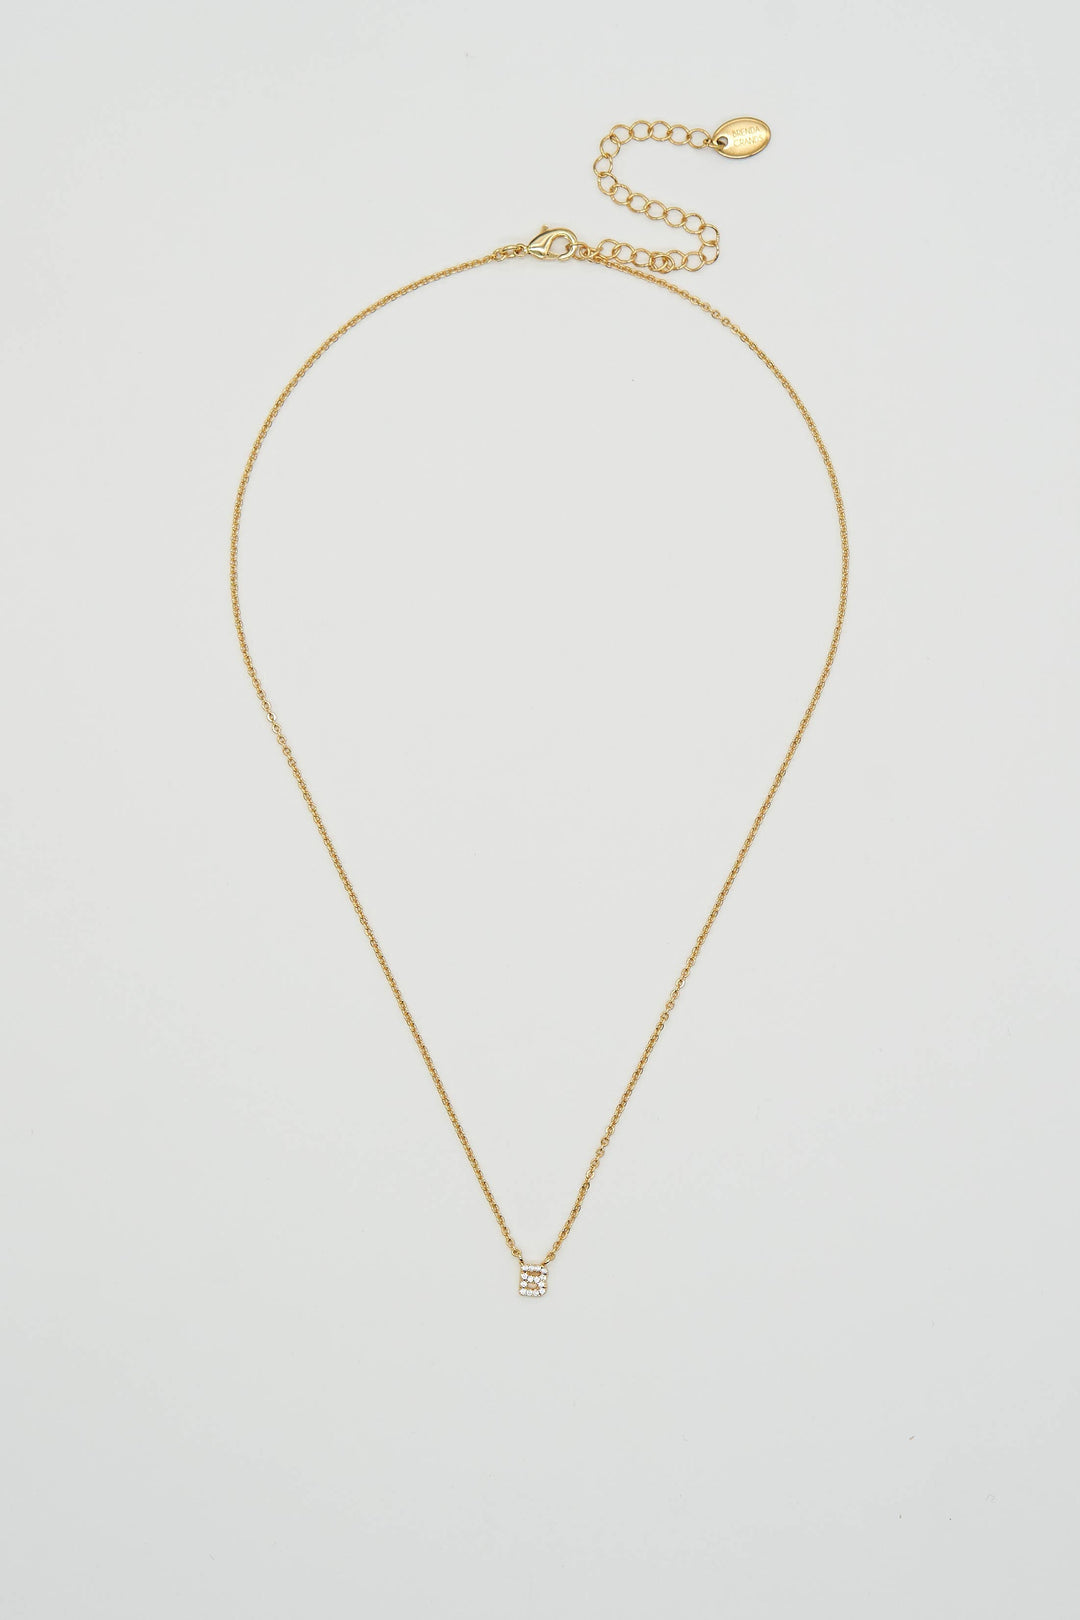 Shiny Initial Necklace: Holiday Favorite!: H